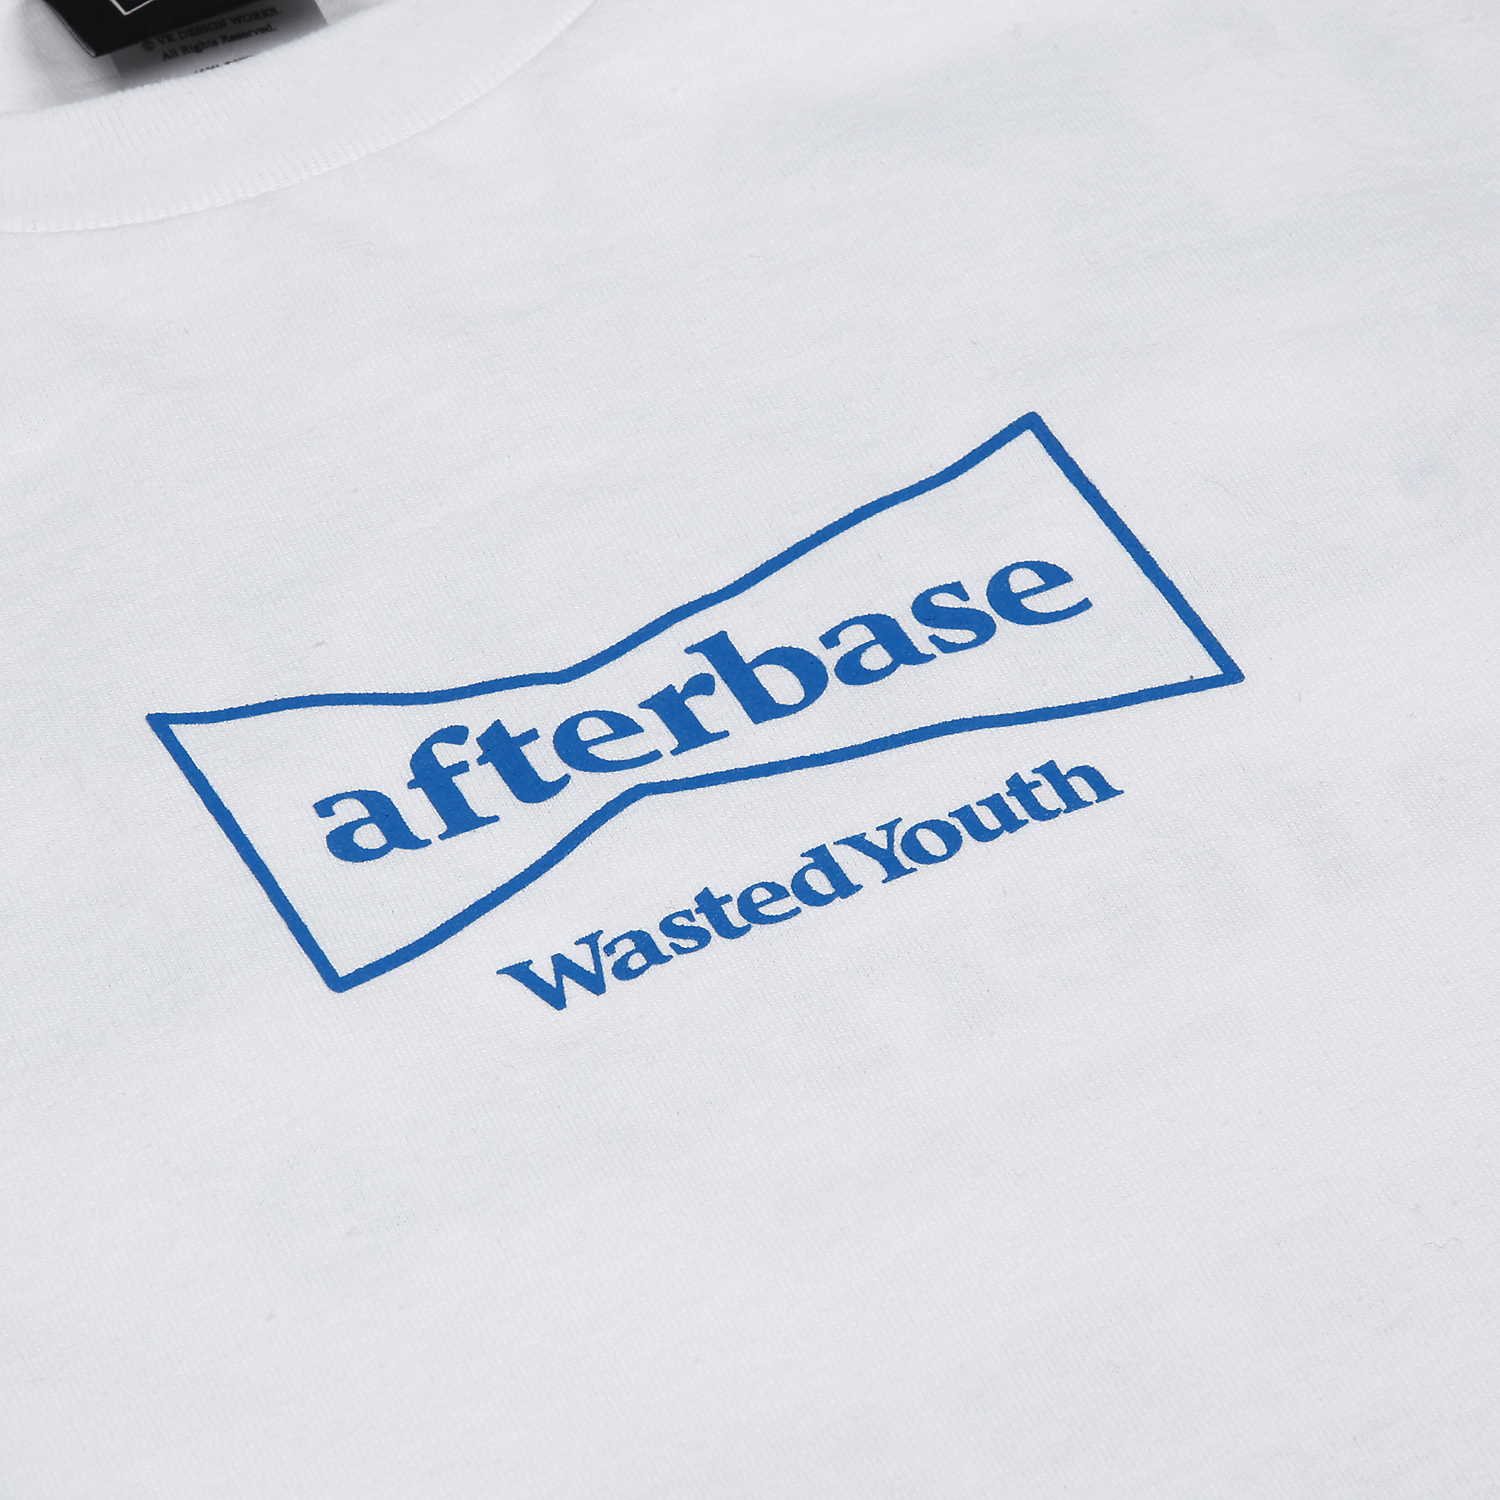 afterbase × wasted youth